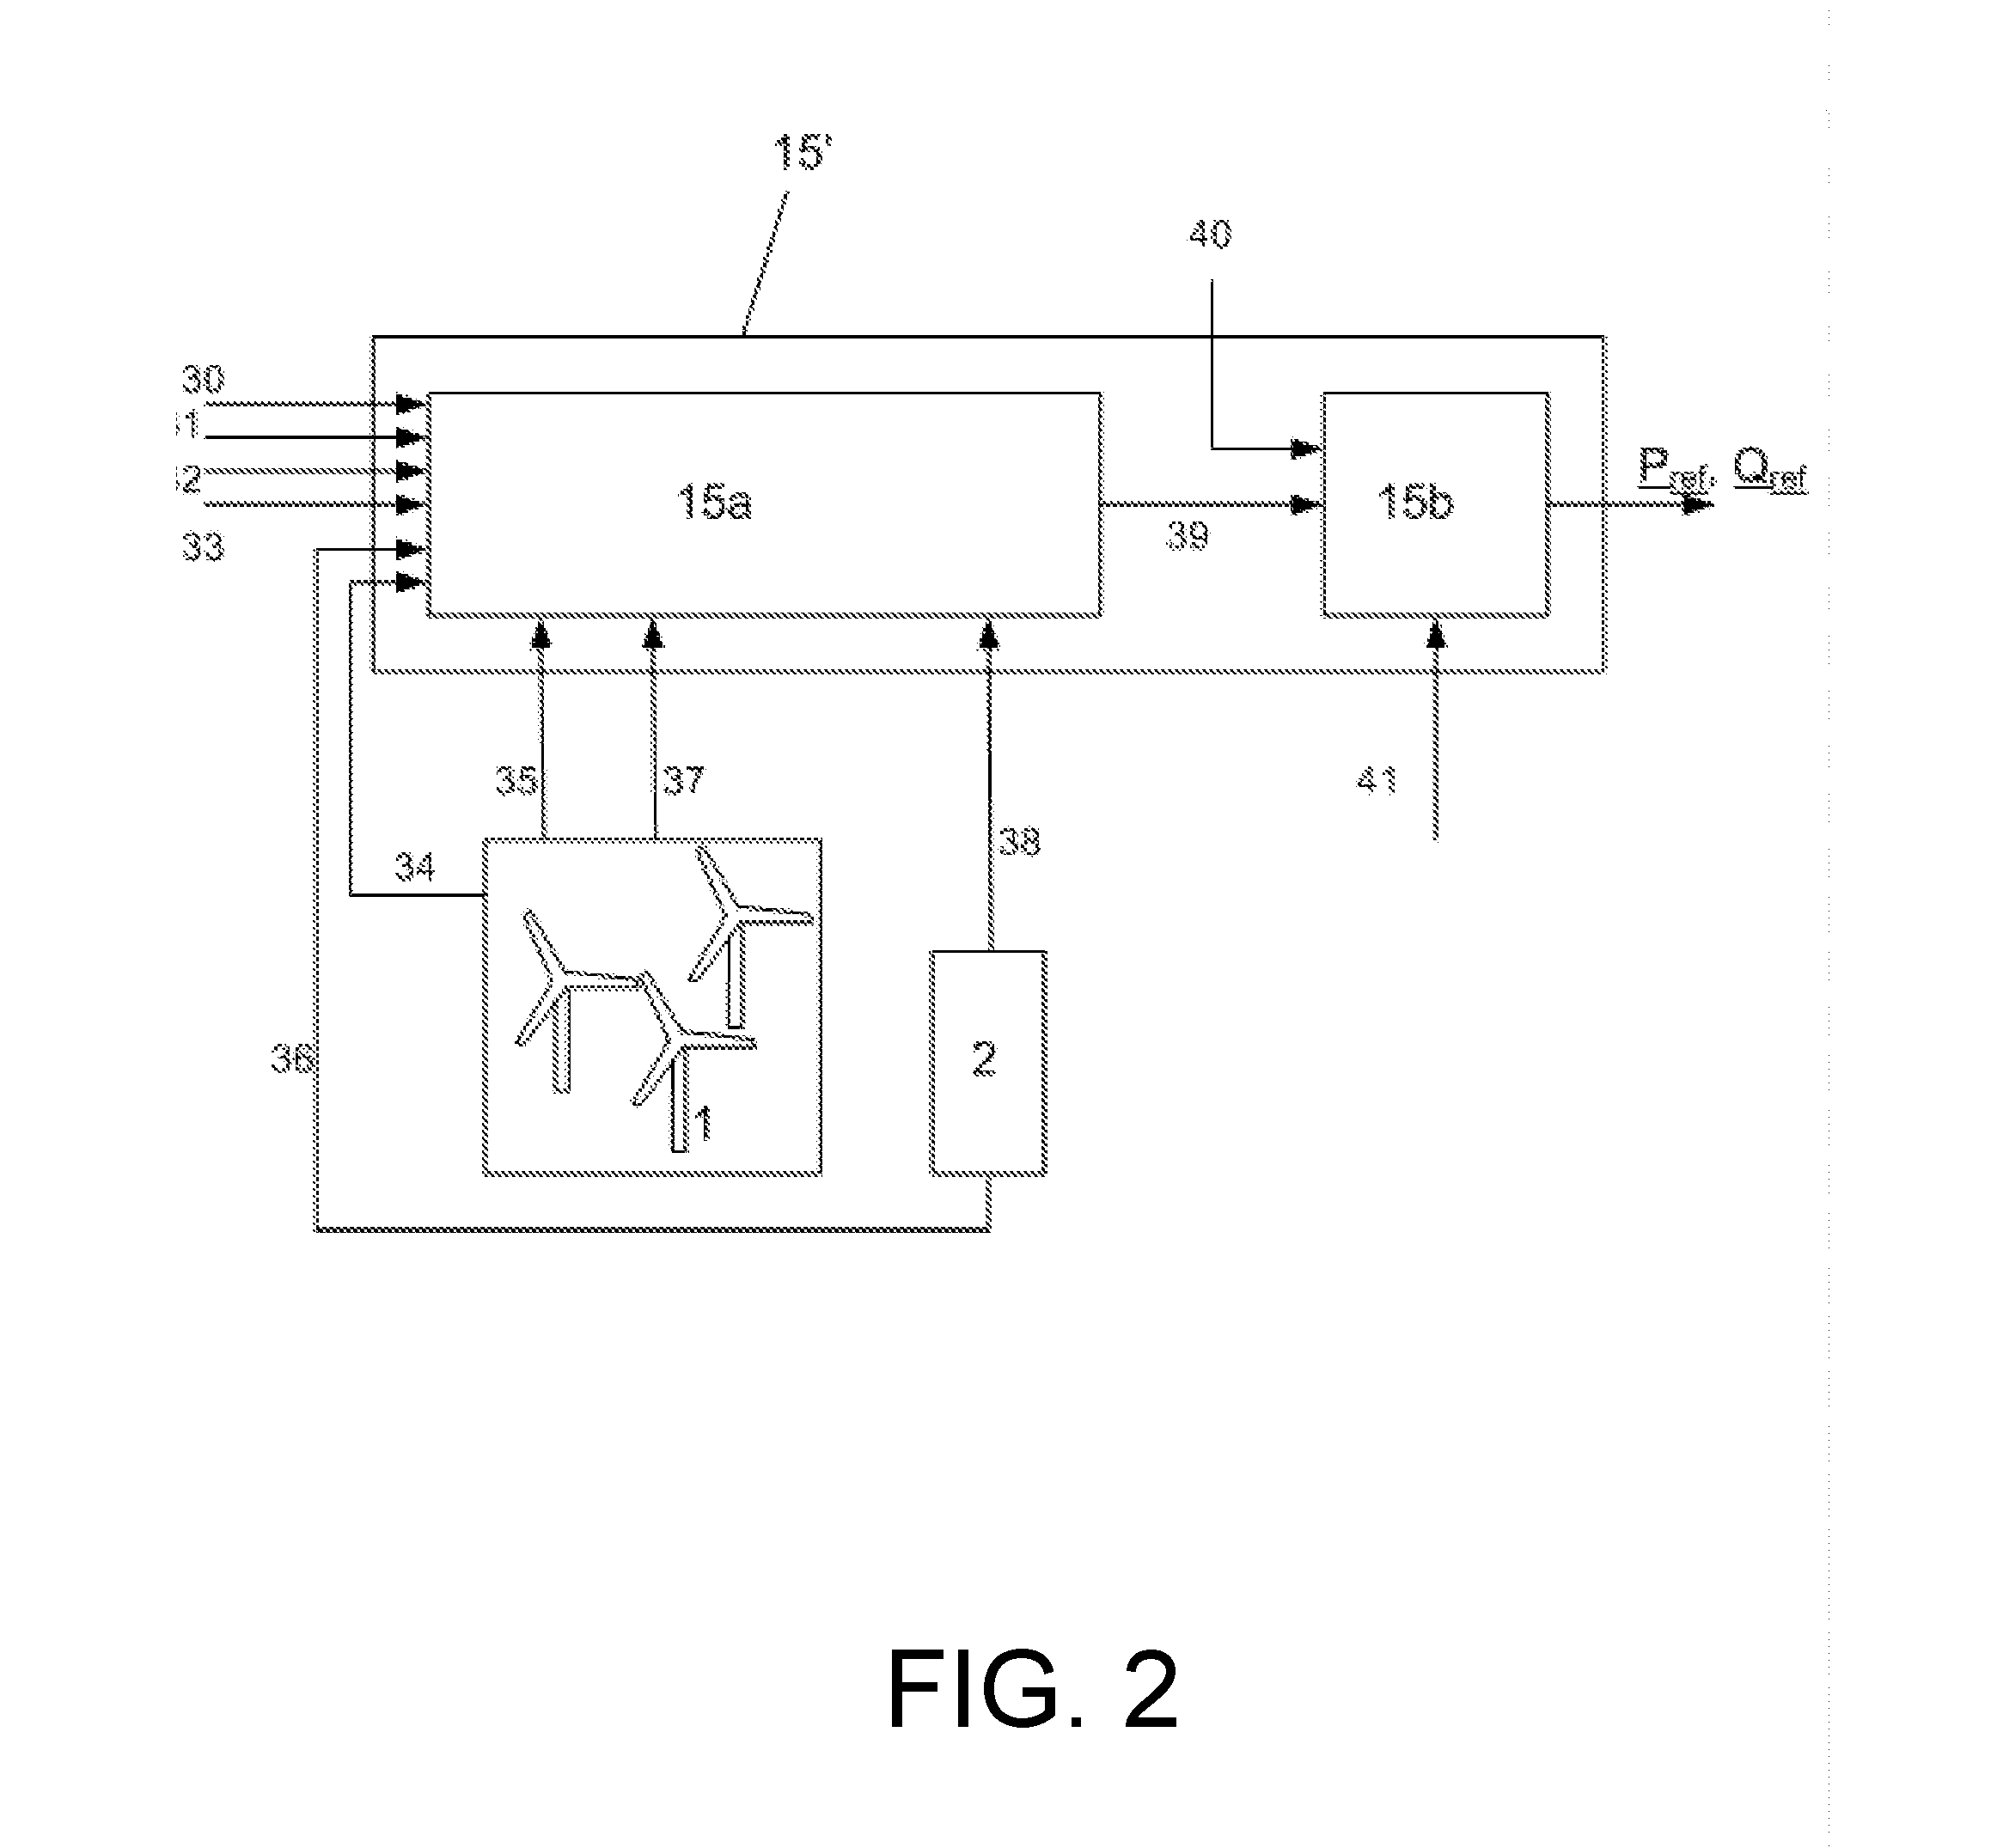 Method of determining individual set points in a power plant controller, and a power plant controller